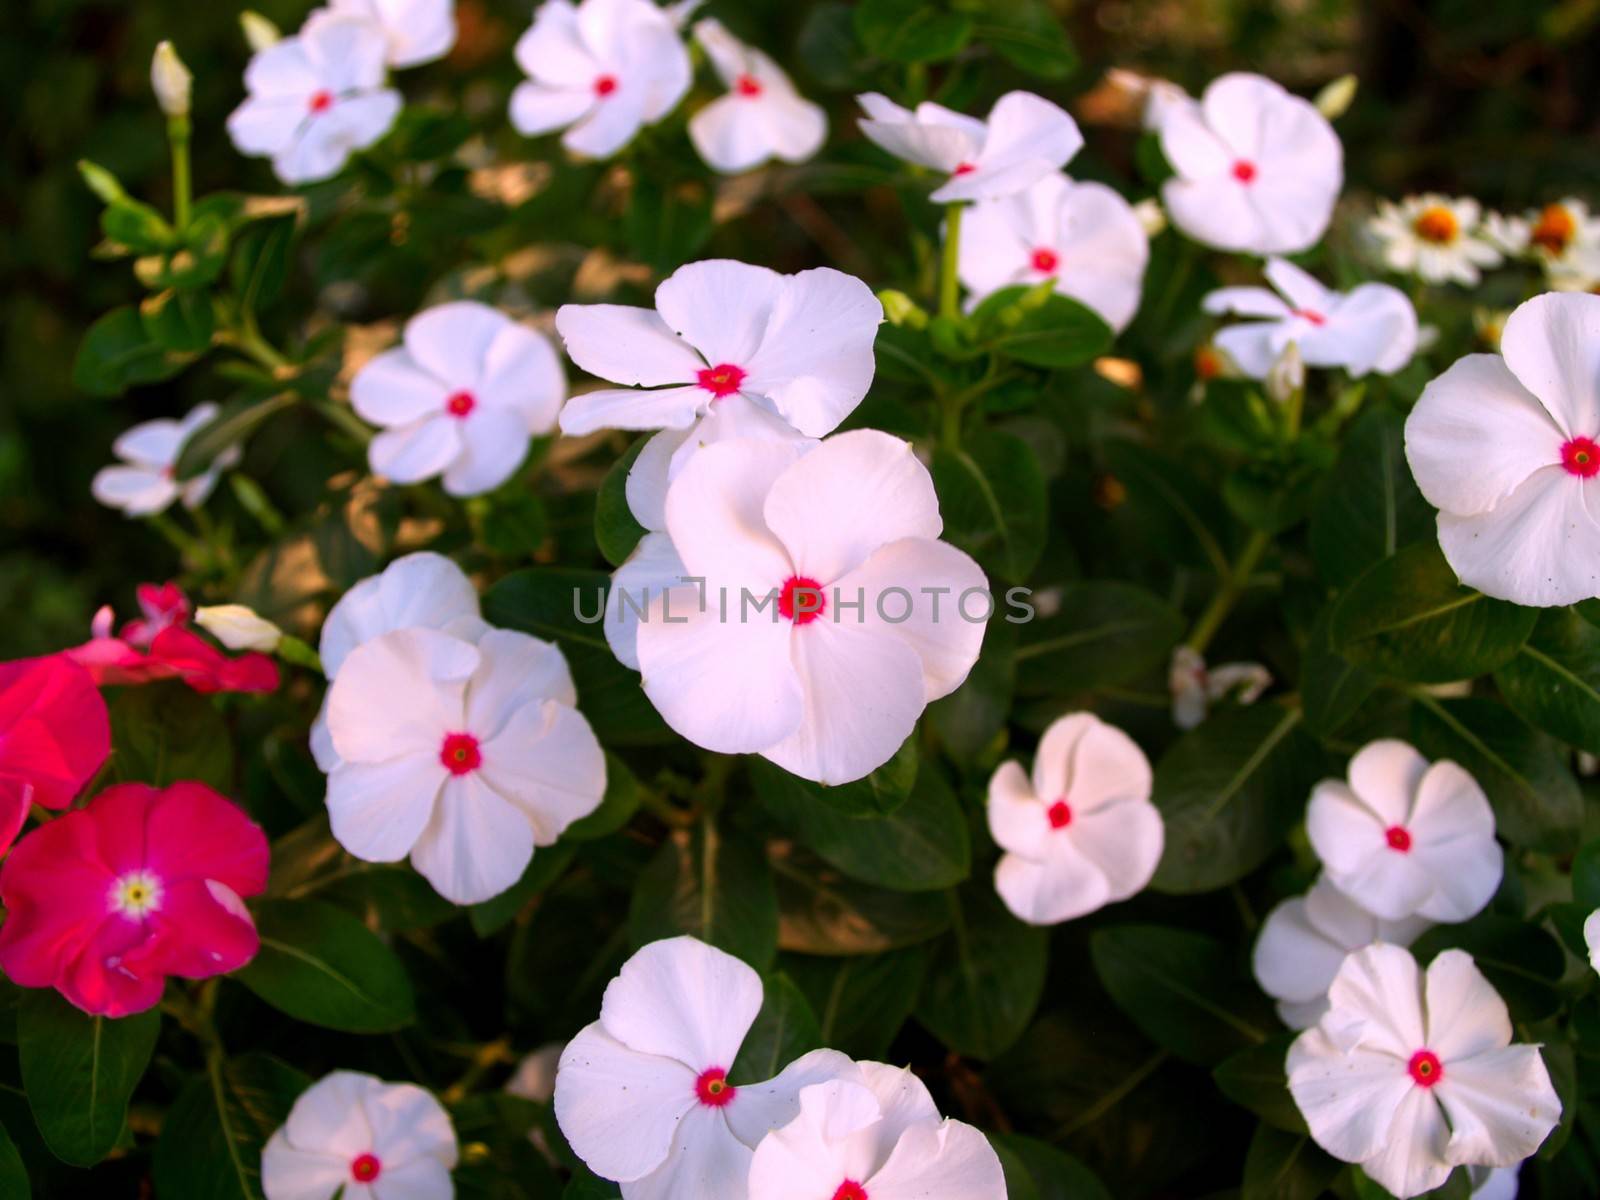 the Selection of Various Colorful  Flower in nature by kiddaikiddee